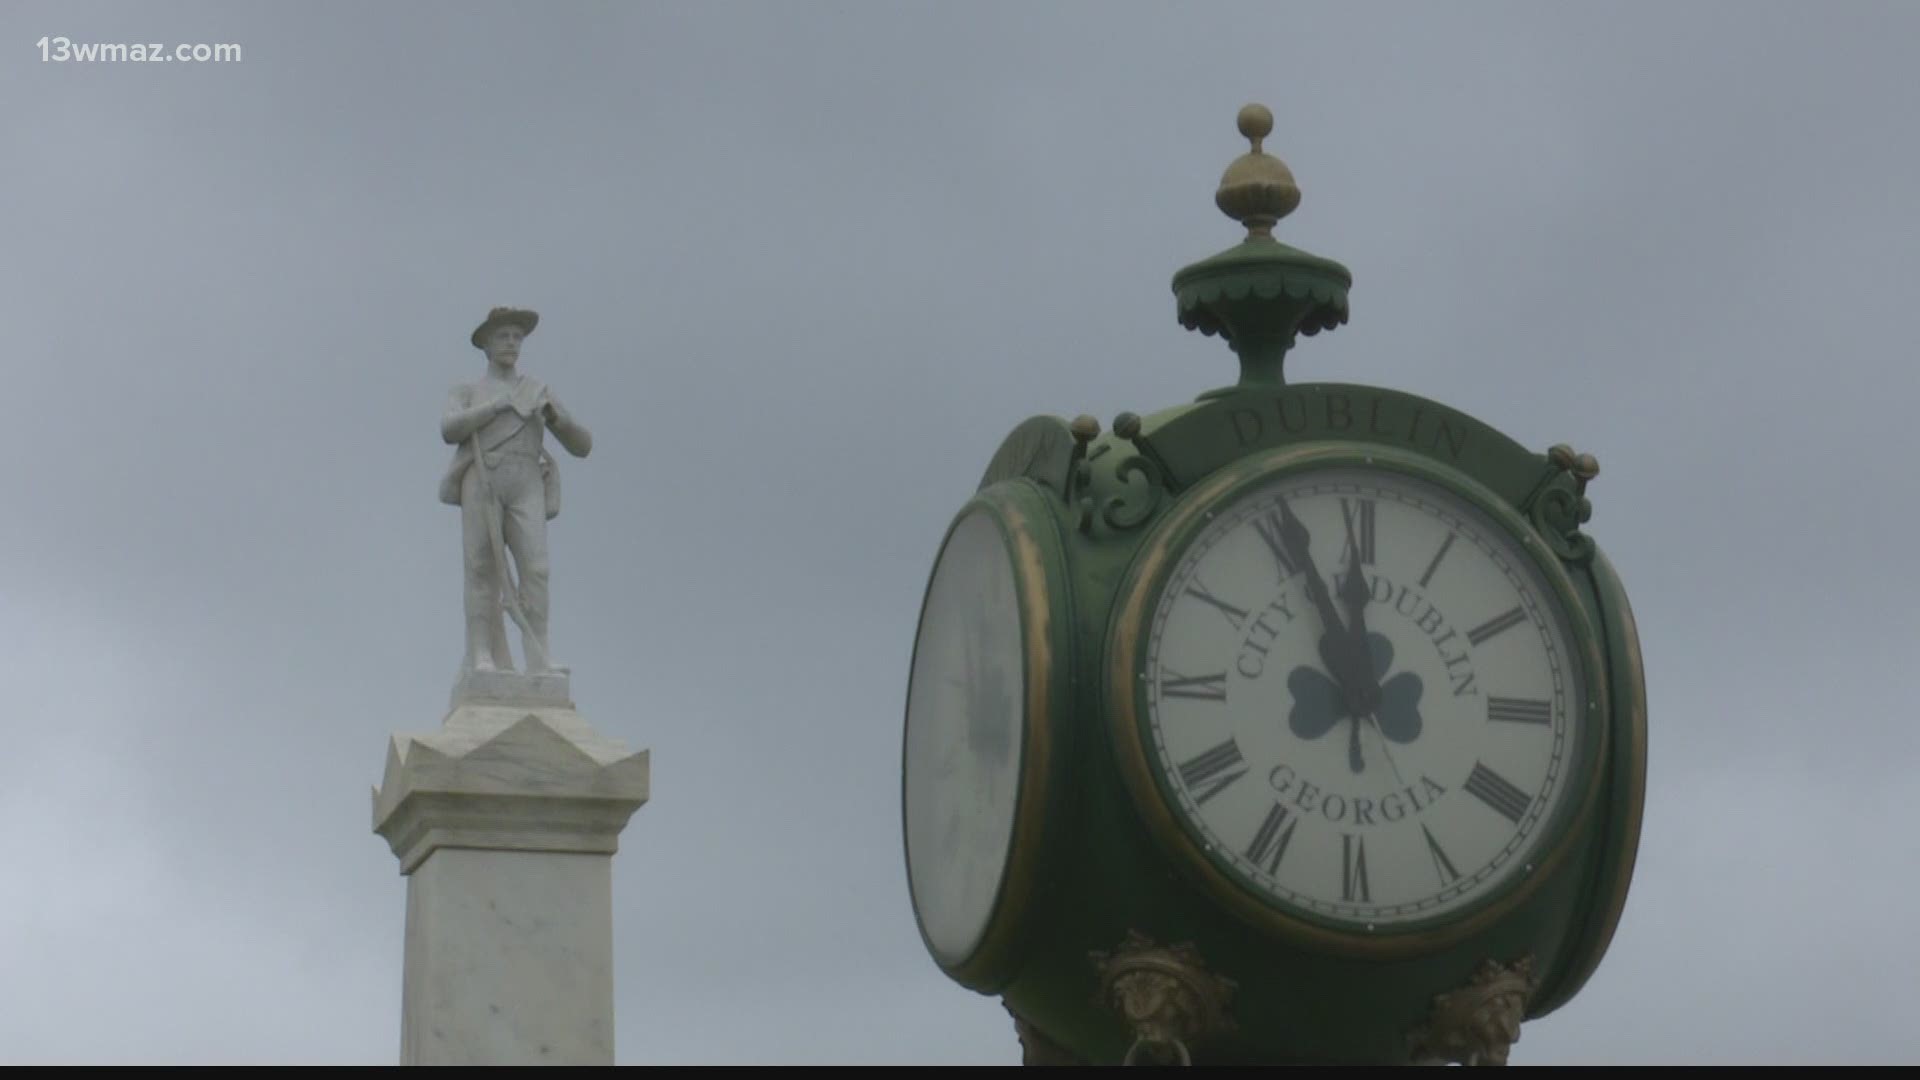 The City of Dublin Race Relations Task Force says the city should either move its downtown Confederate statue or provide more historical context.